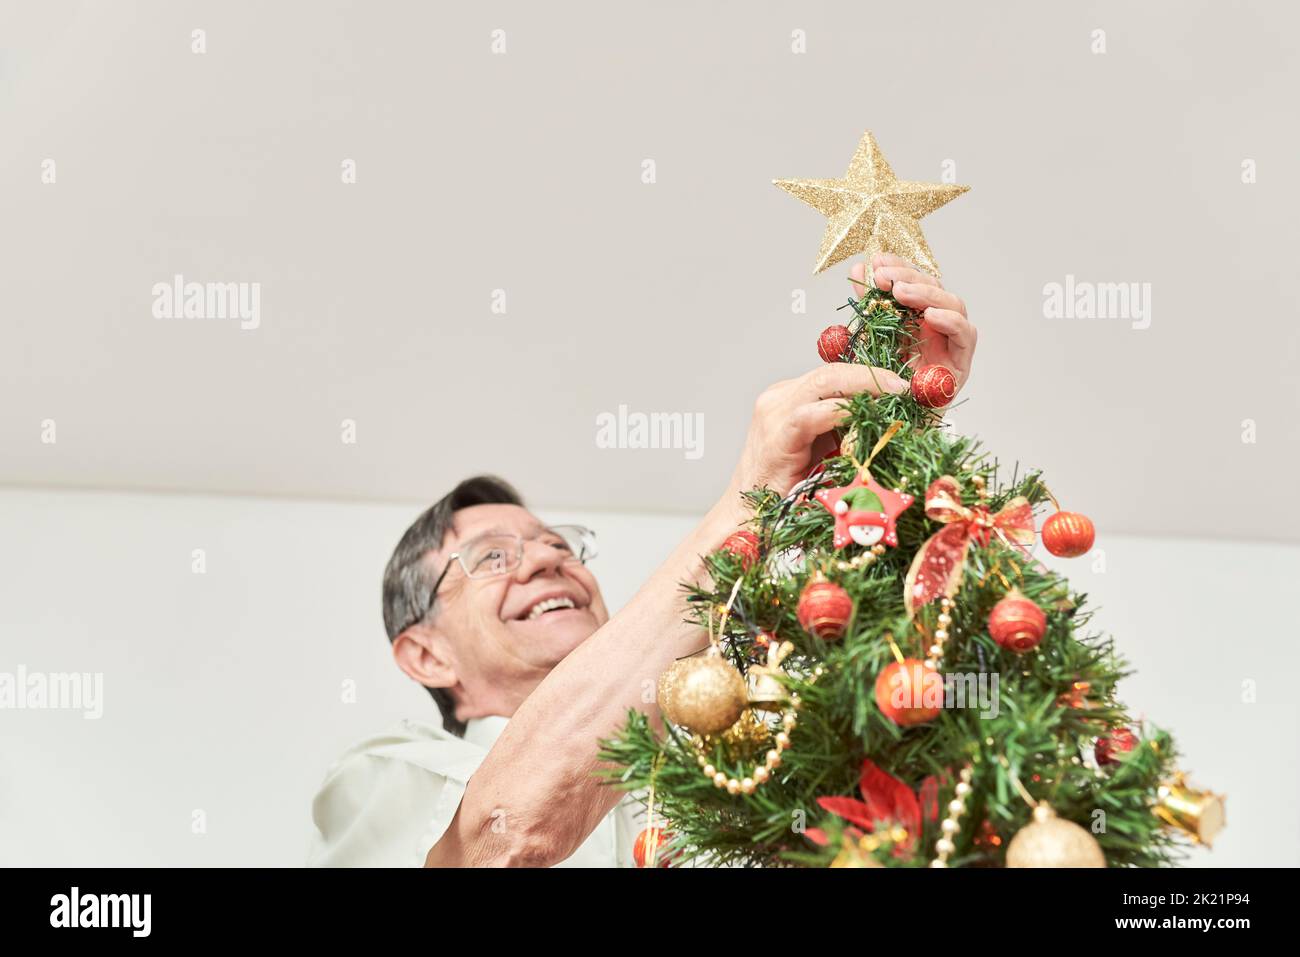 Happy senior latin man smiling as he puts a gold star on the top of his Christmas tree, the joy of spending the holidays at home. Stock Photo